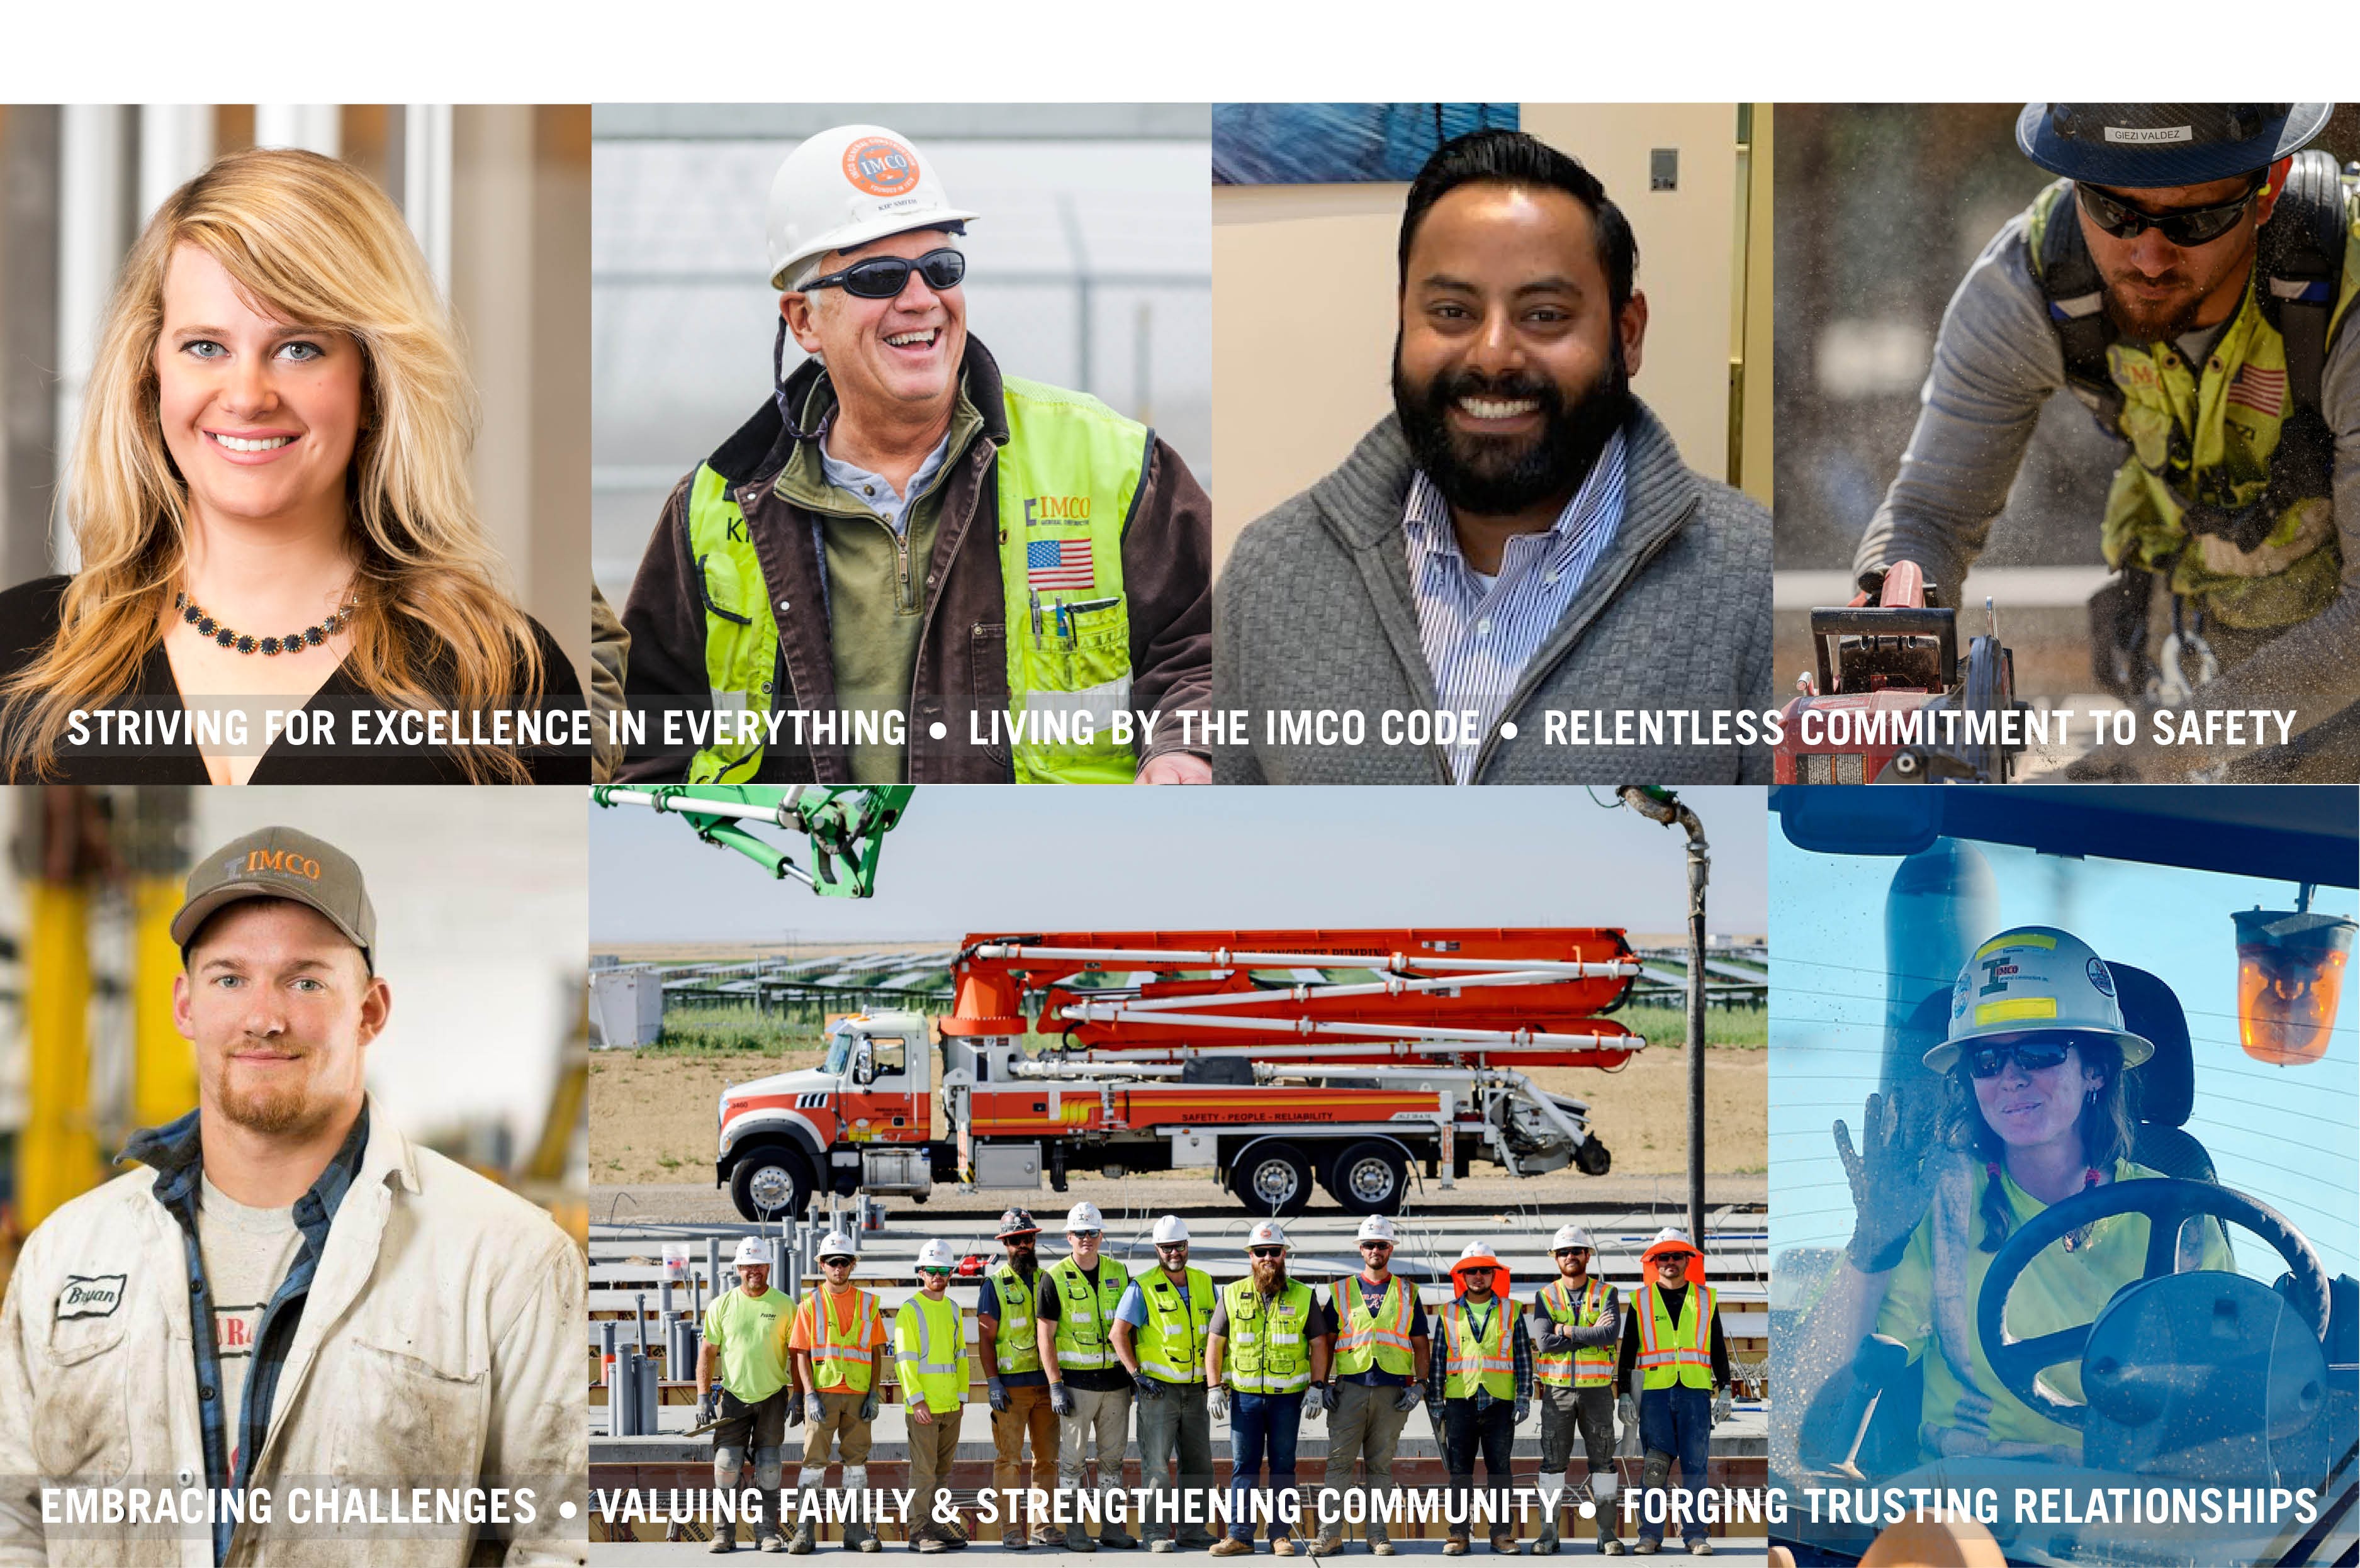 collage of people working in construction with four men, on woman in cab, on woman smiling and group of workers lined up in front of red truck